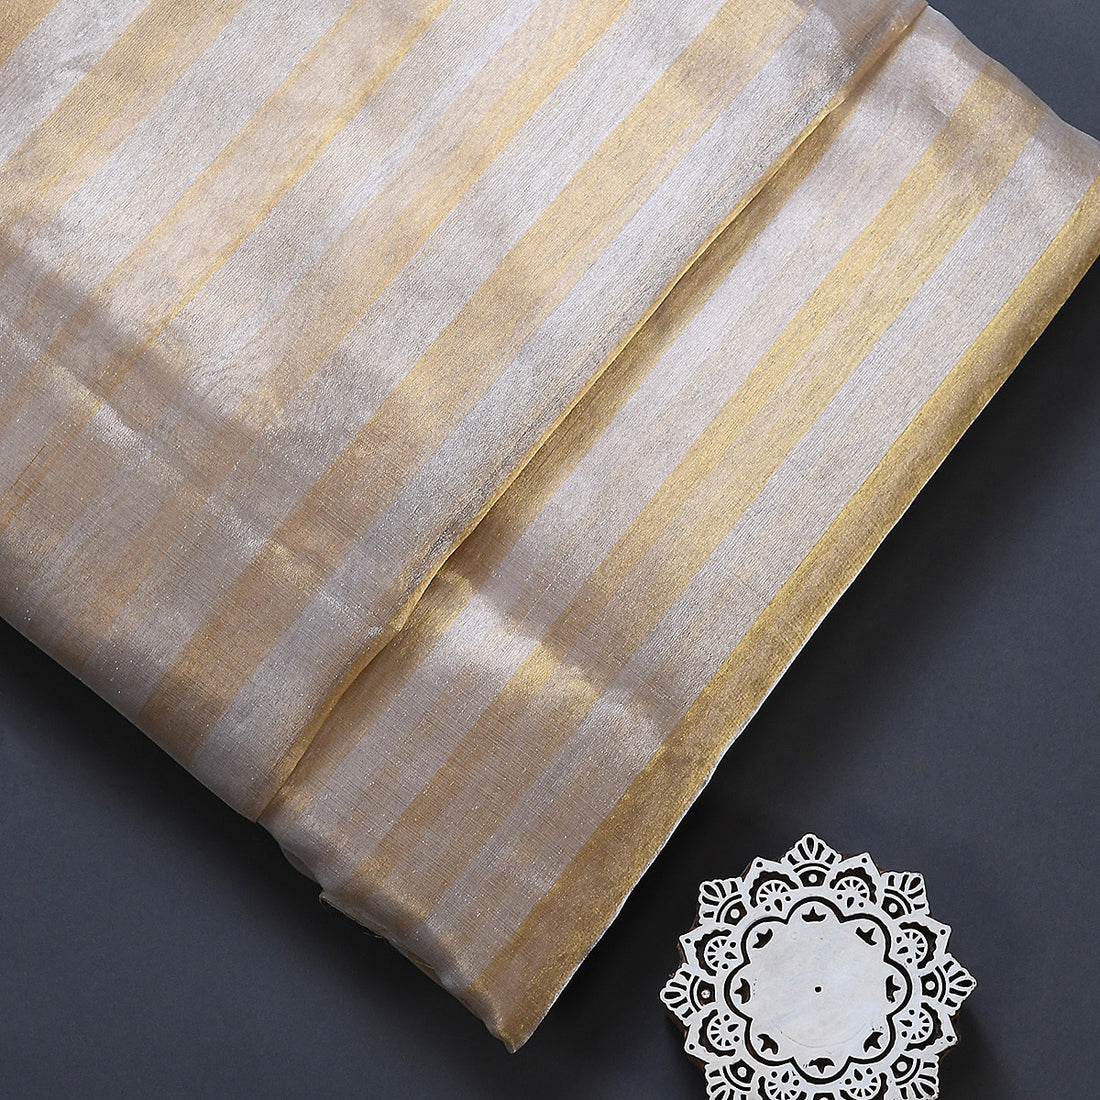 Handloom_Silver_and_Gold_Tissue_Fabric_Woven_in_Chanderi_WeaverStory_01